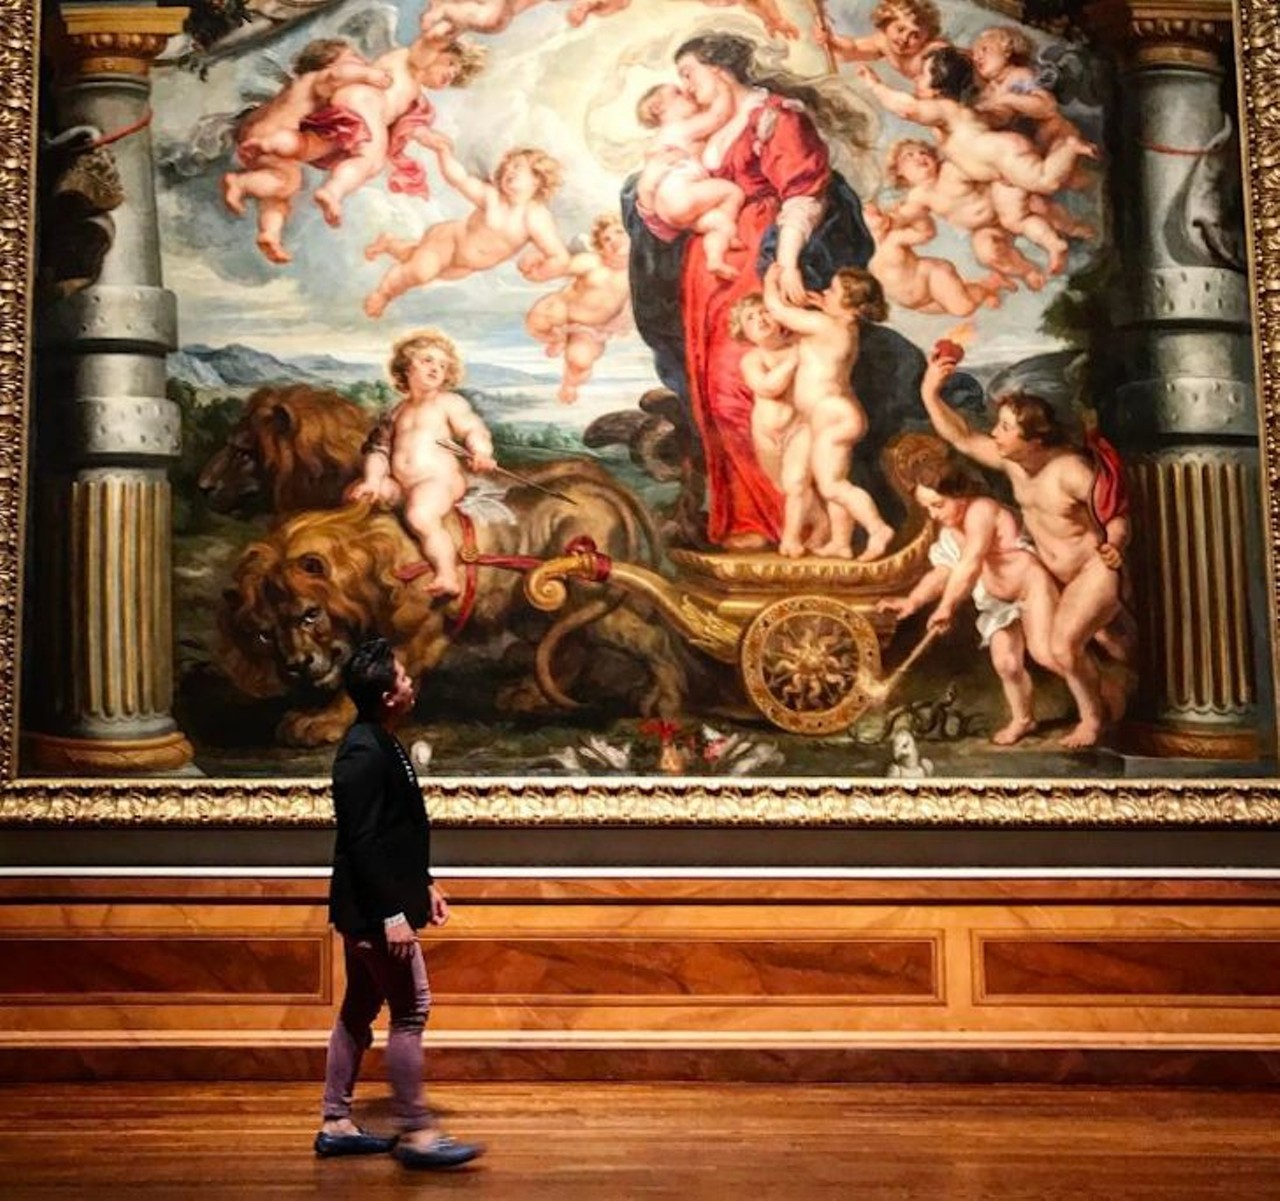 John and Mable Ringling Museum of Art
5401 Bay Shore Road, Sarasota, (941) 359-5700
There&#146;s a little bit of everything at this estate: You can tour walls and walls of artwork, stroll across sprawling bayfront gardens or learn more about the famous Ringling circus. 
Photo via pm.lawrence/Instagram